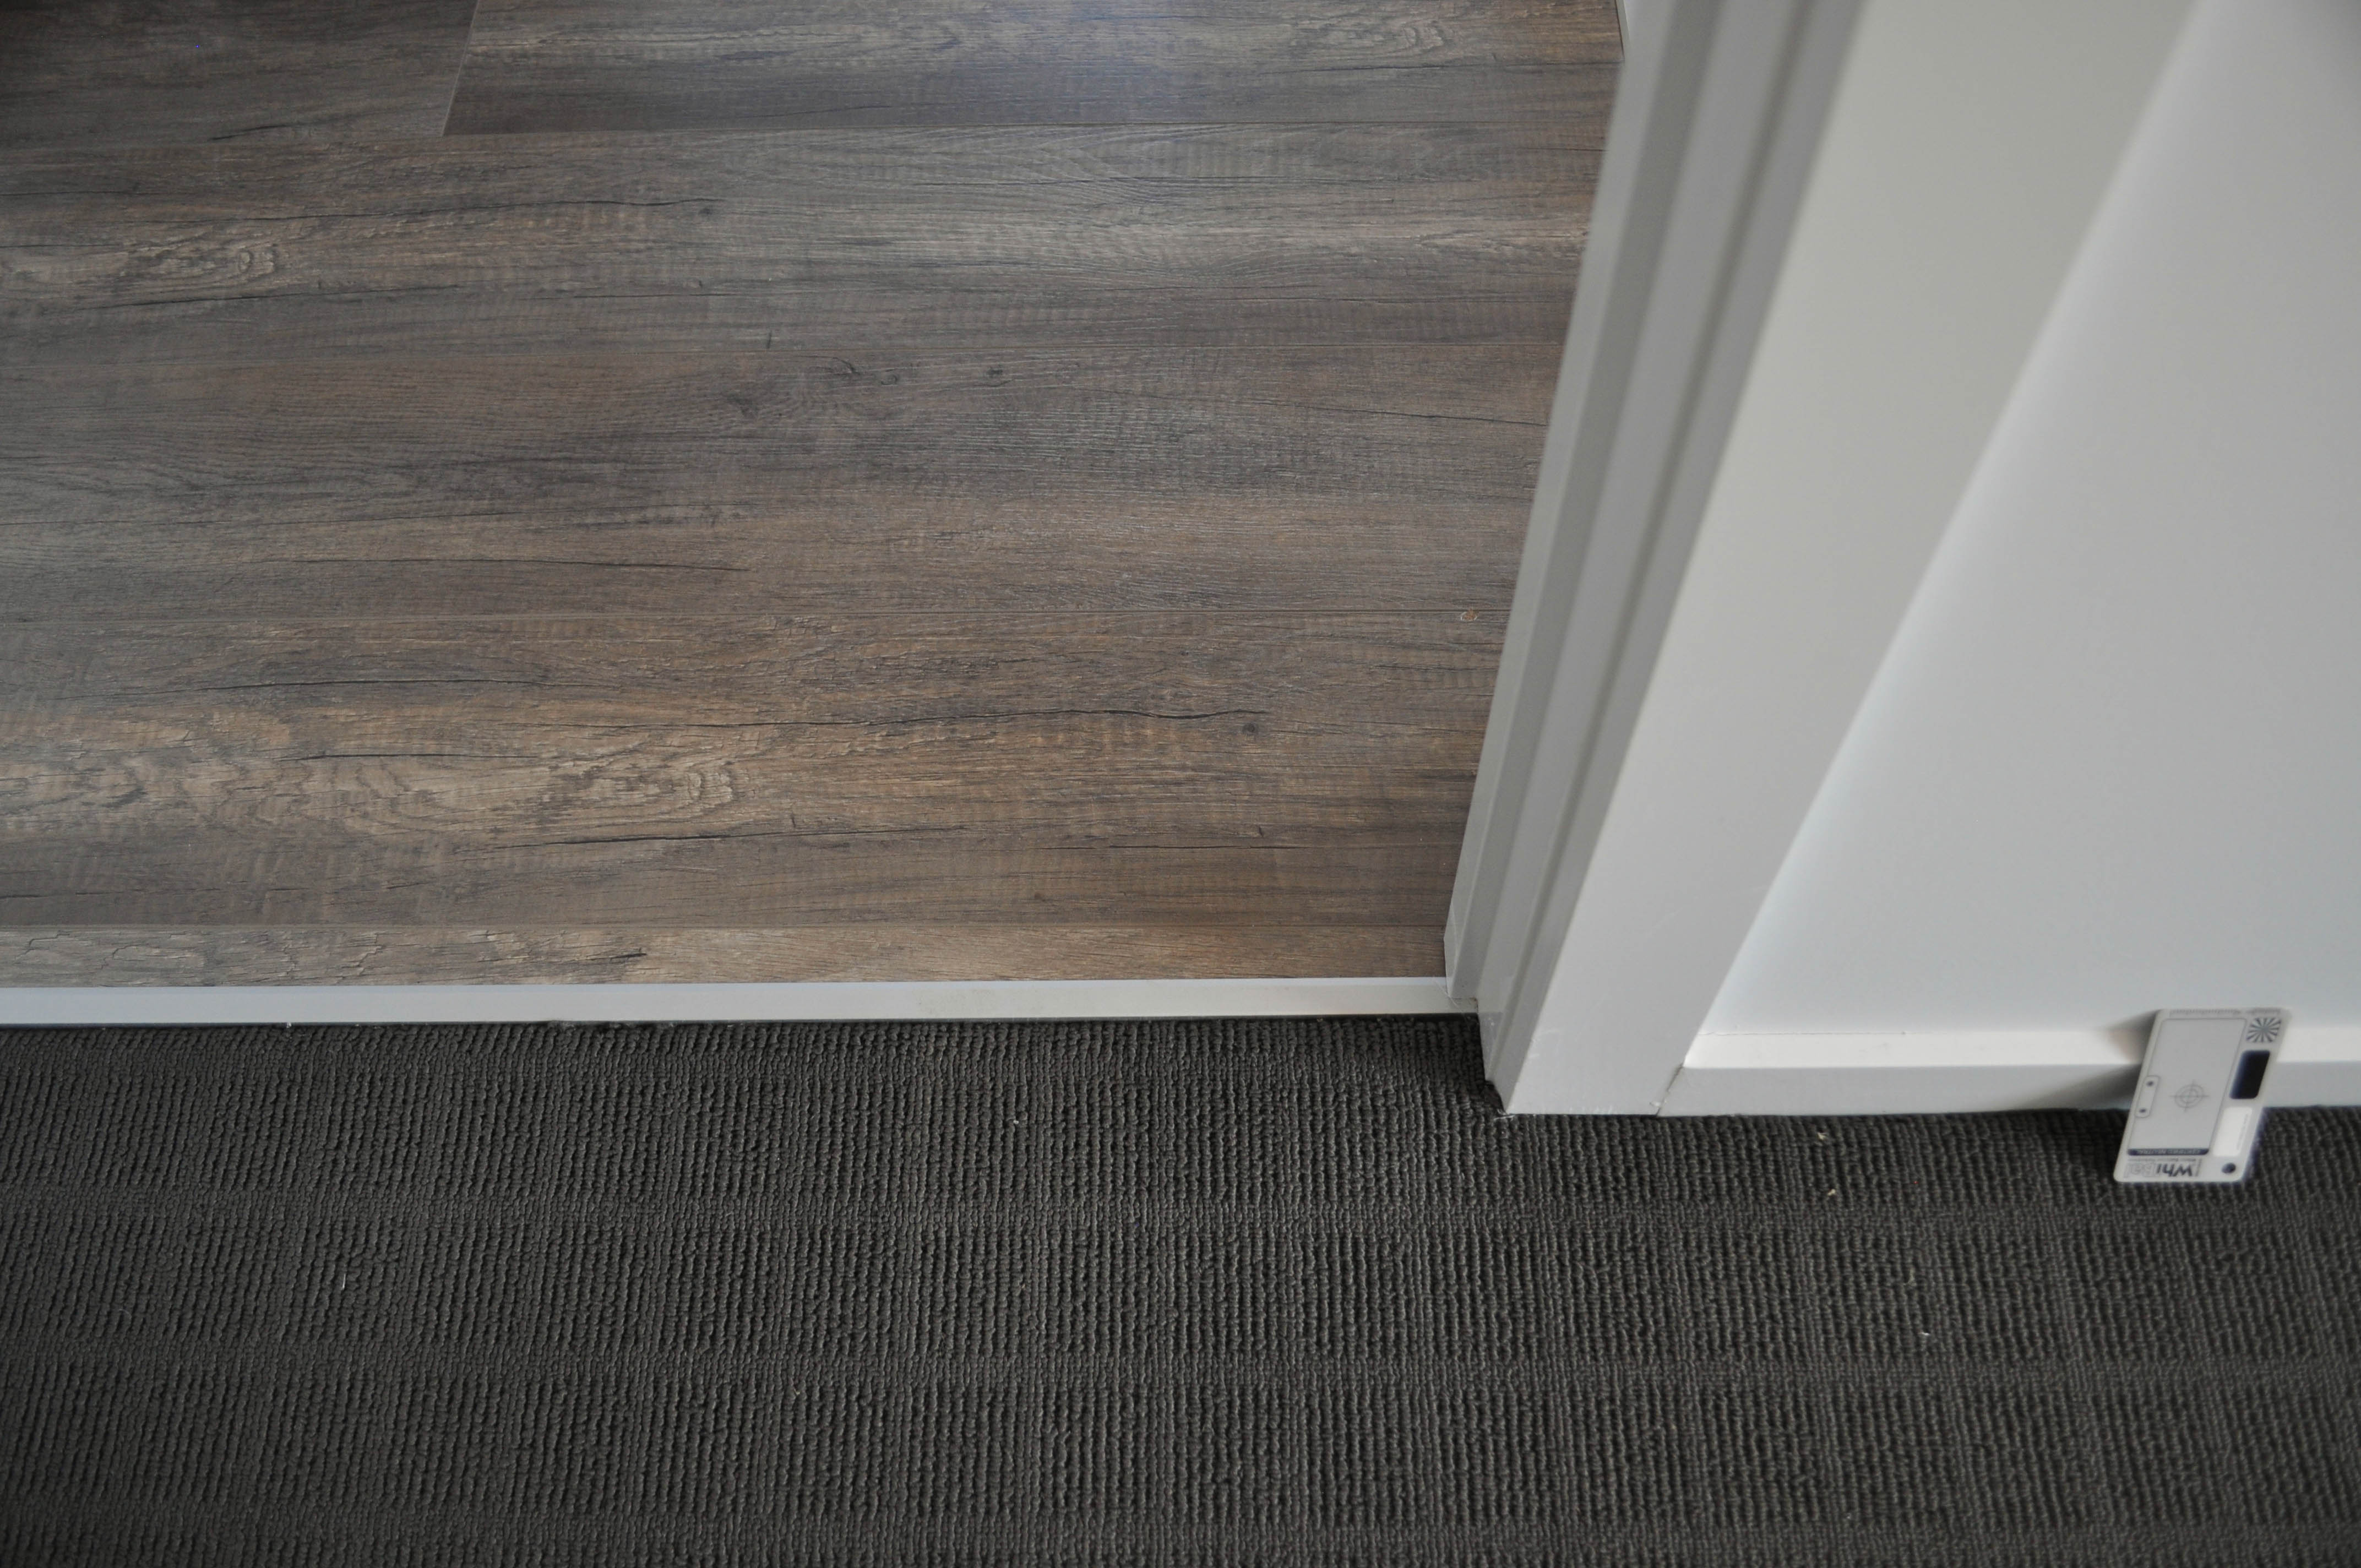 showing 12mm thick weathered oak laminate flooring installed in a room in the suburb of Werribee Vic 3340 by 
              Concord Floors next to patterned polypropelene, dak grey carpet and painted walls showing the interplay of the materials and their colors to produce
              harmony in the color scheme of interior decor in this home.It also shows the hard top surface of the laminate flooring which is even and the picture illustrates the ease 
              with which the surface of a laminate floor can be cleaned. The home is in the suburb of Hoppers Crossing, Vic 3029 and the laminate floorboards and the 
              carpet was supplied and laid by Concord Floors.